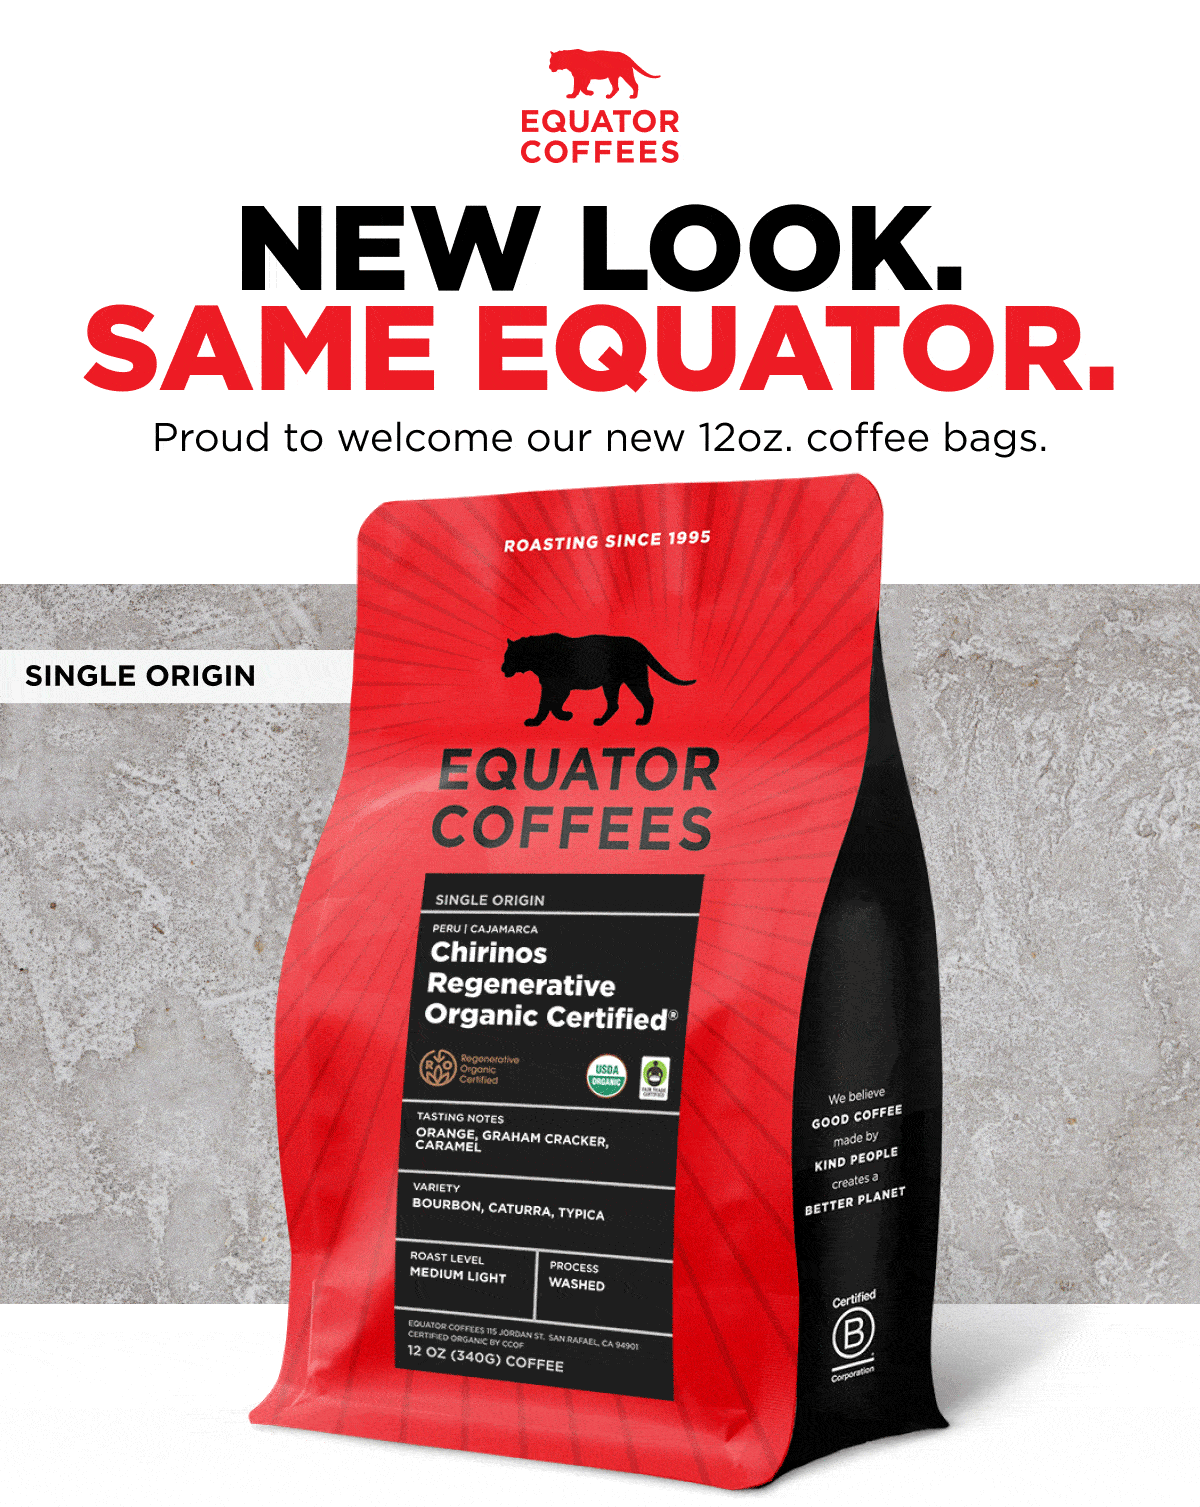 New Look. Same Equator. Proud to welcome our new 12oz coffee bags.